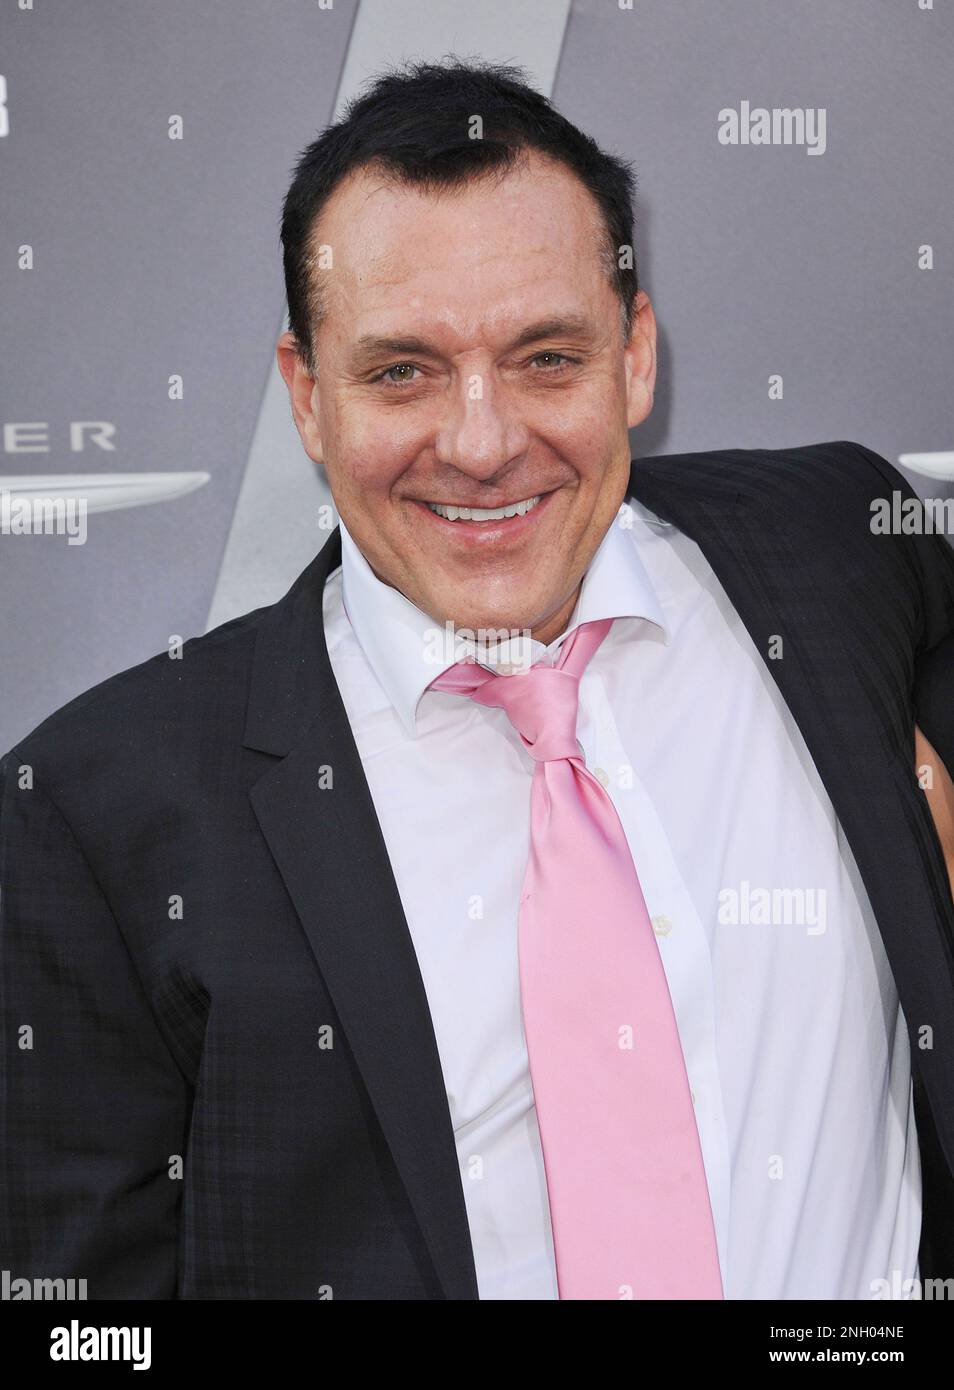 Los Angeles, USA. 02nd Aug, 2012. Tom Sizemore at the Total Recall Premiere at the Chinese Theatre In Los Angeles.Tom Sizemore in critical condition after suffering brain aneurysm Credit: Tsuni/USA/Alamy Live News Stock Photo